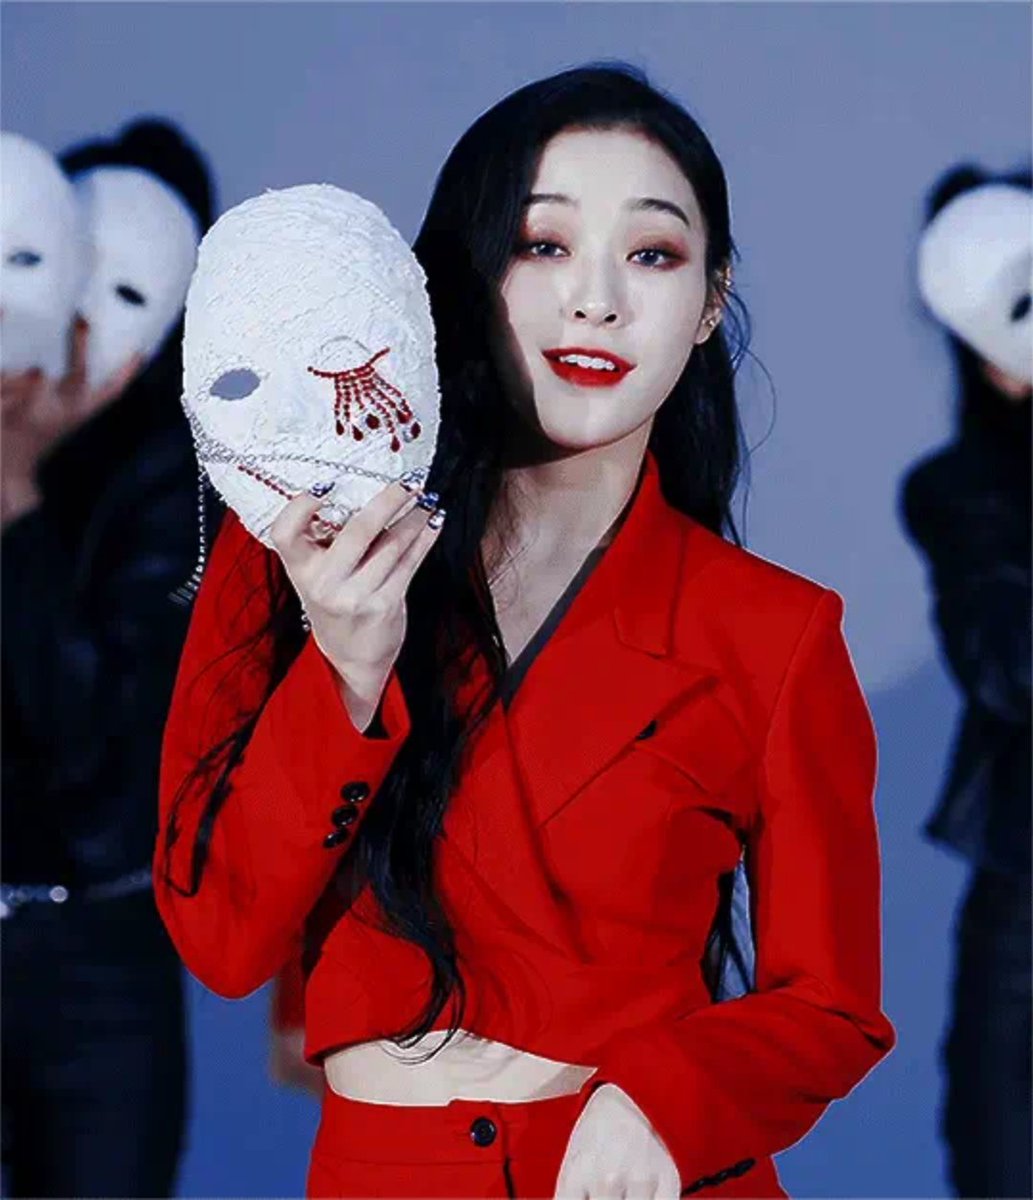 lee gahyeon as megitsune- if you've heard one babymetal song in your life i GUARANTEE you it was this- also very self explanatory- megitsune = female fox- gahyeon's animal is a fox- there are kitsune masks wielded by the girls in the mv- i rest my case